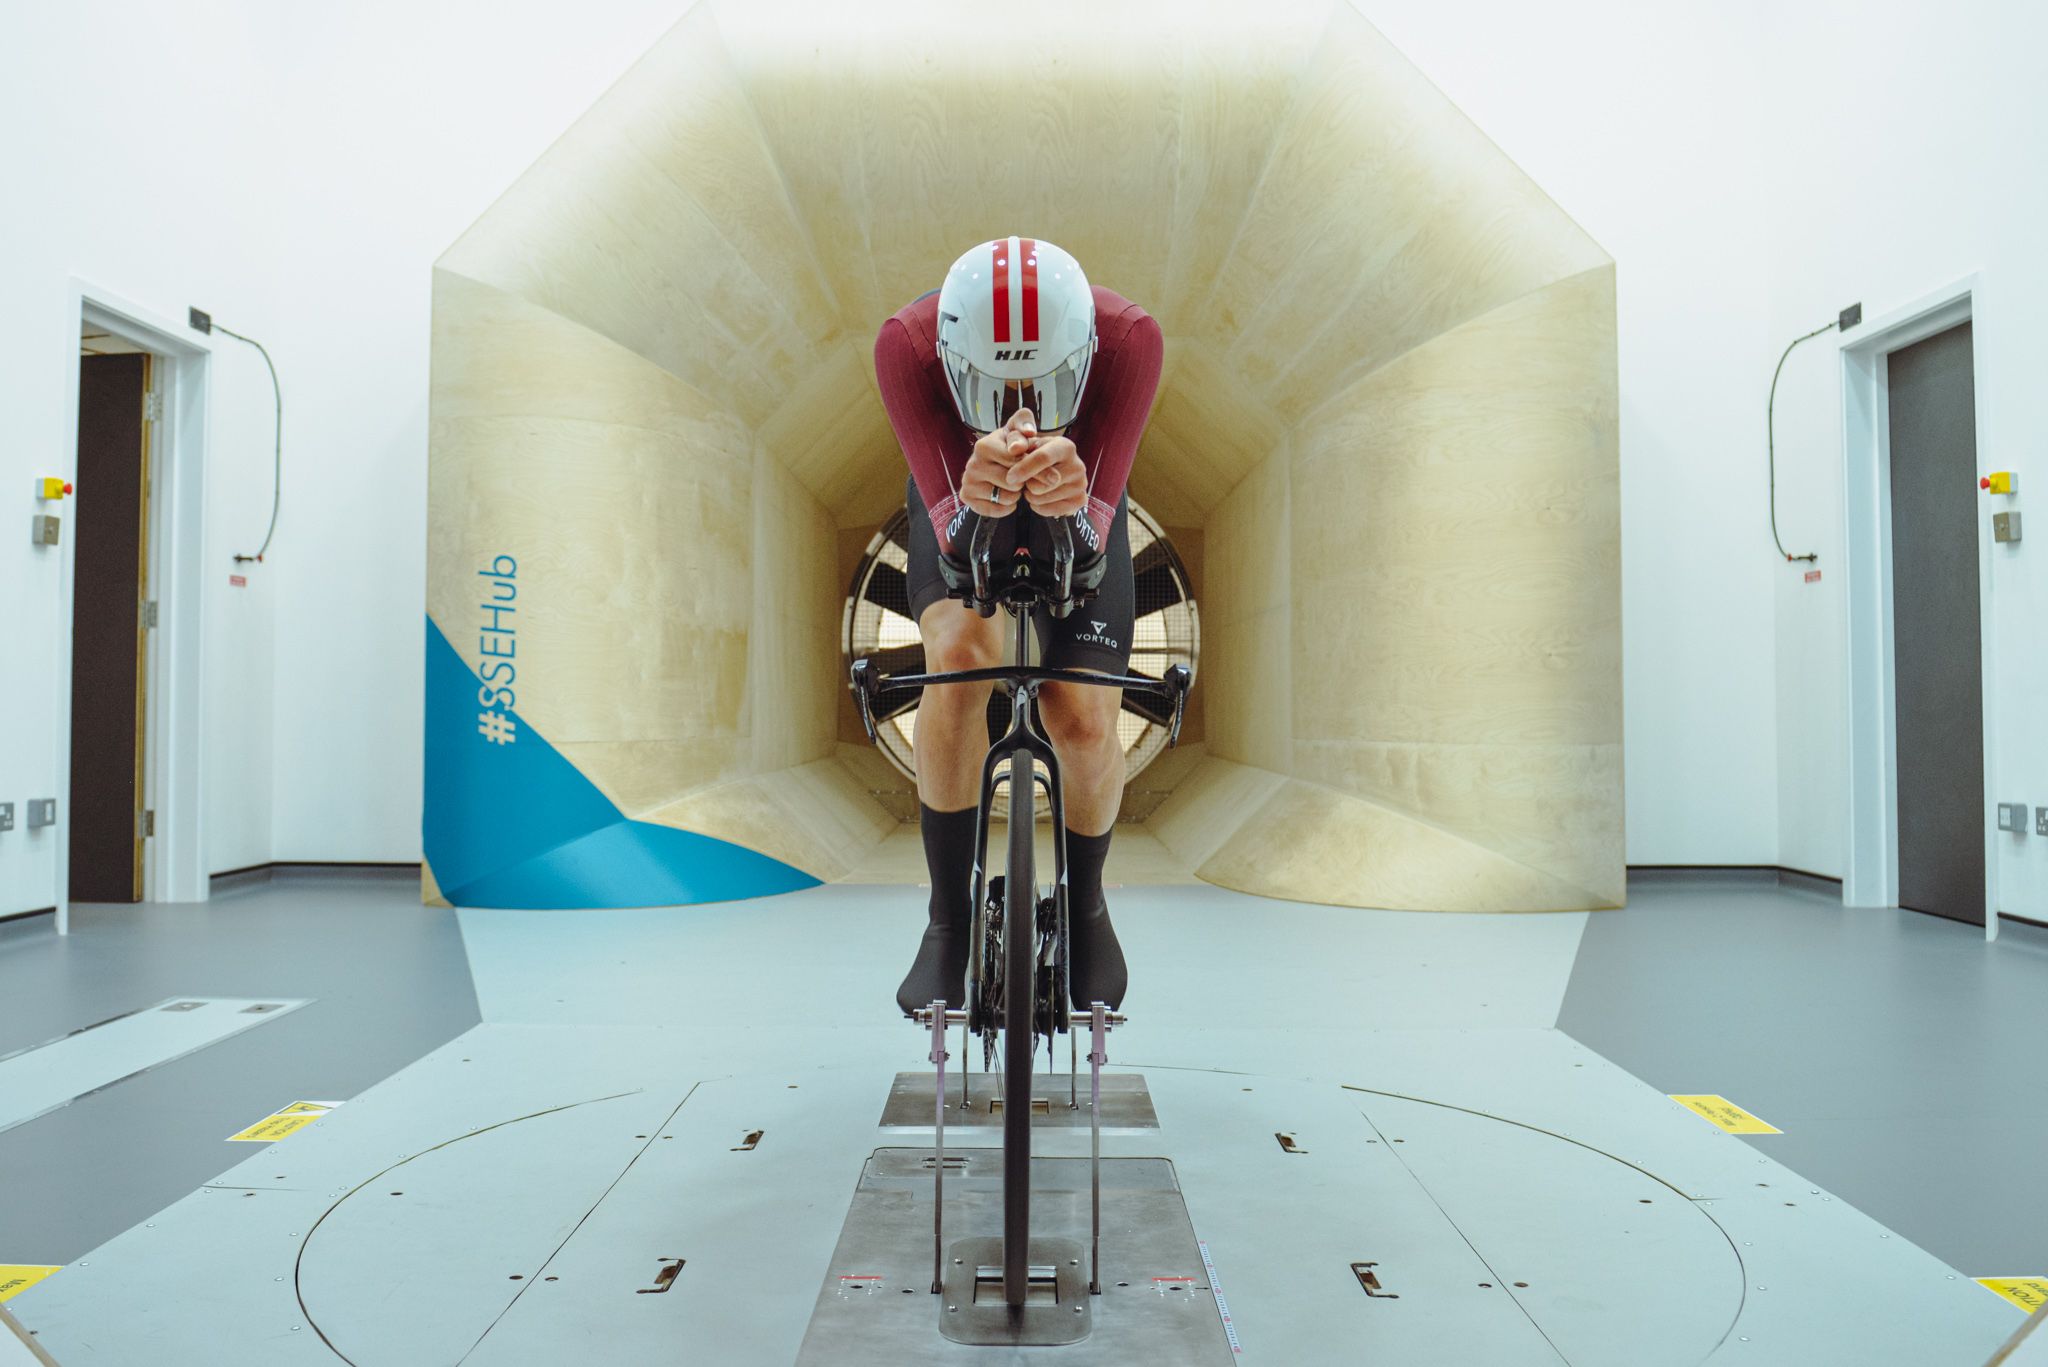 The hour record